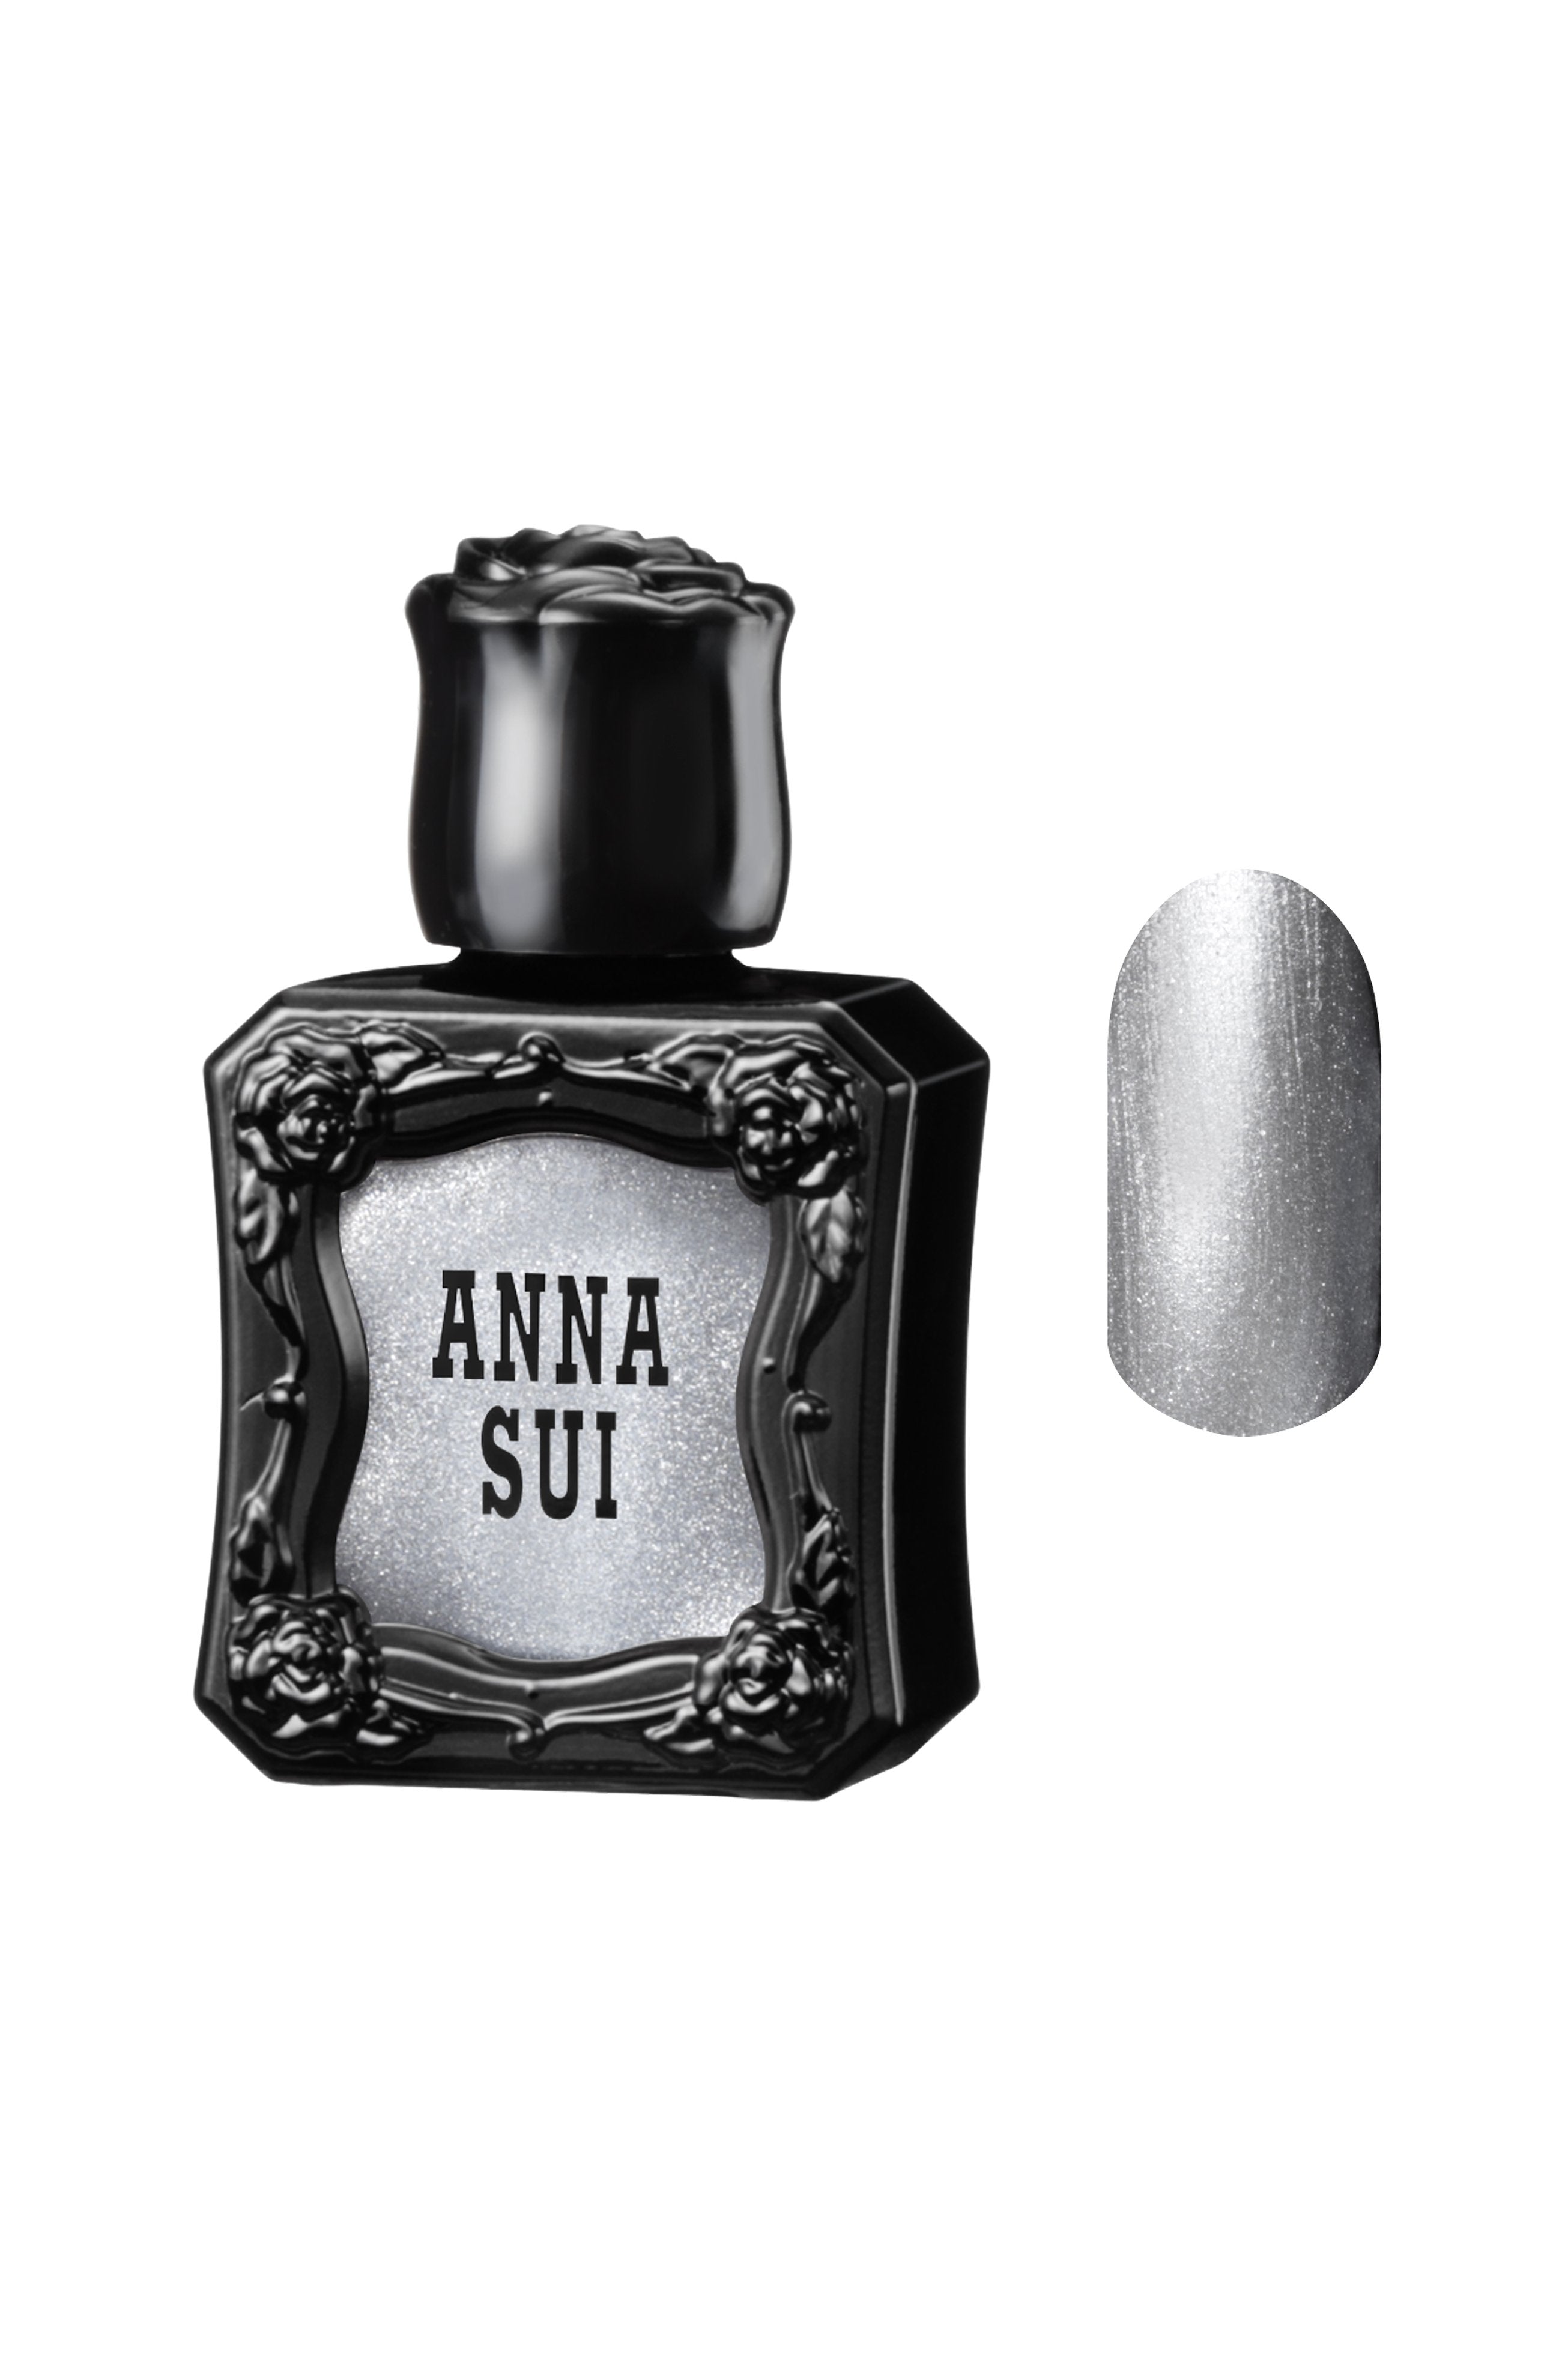 METALLIC SILVER Nail Polish bottles, with raised rose pattern, Anna Sui in black over nail colors in bottle front